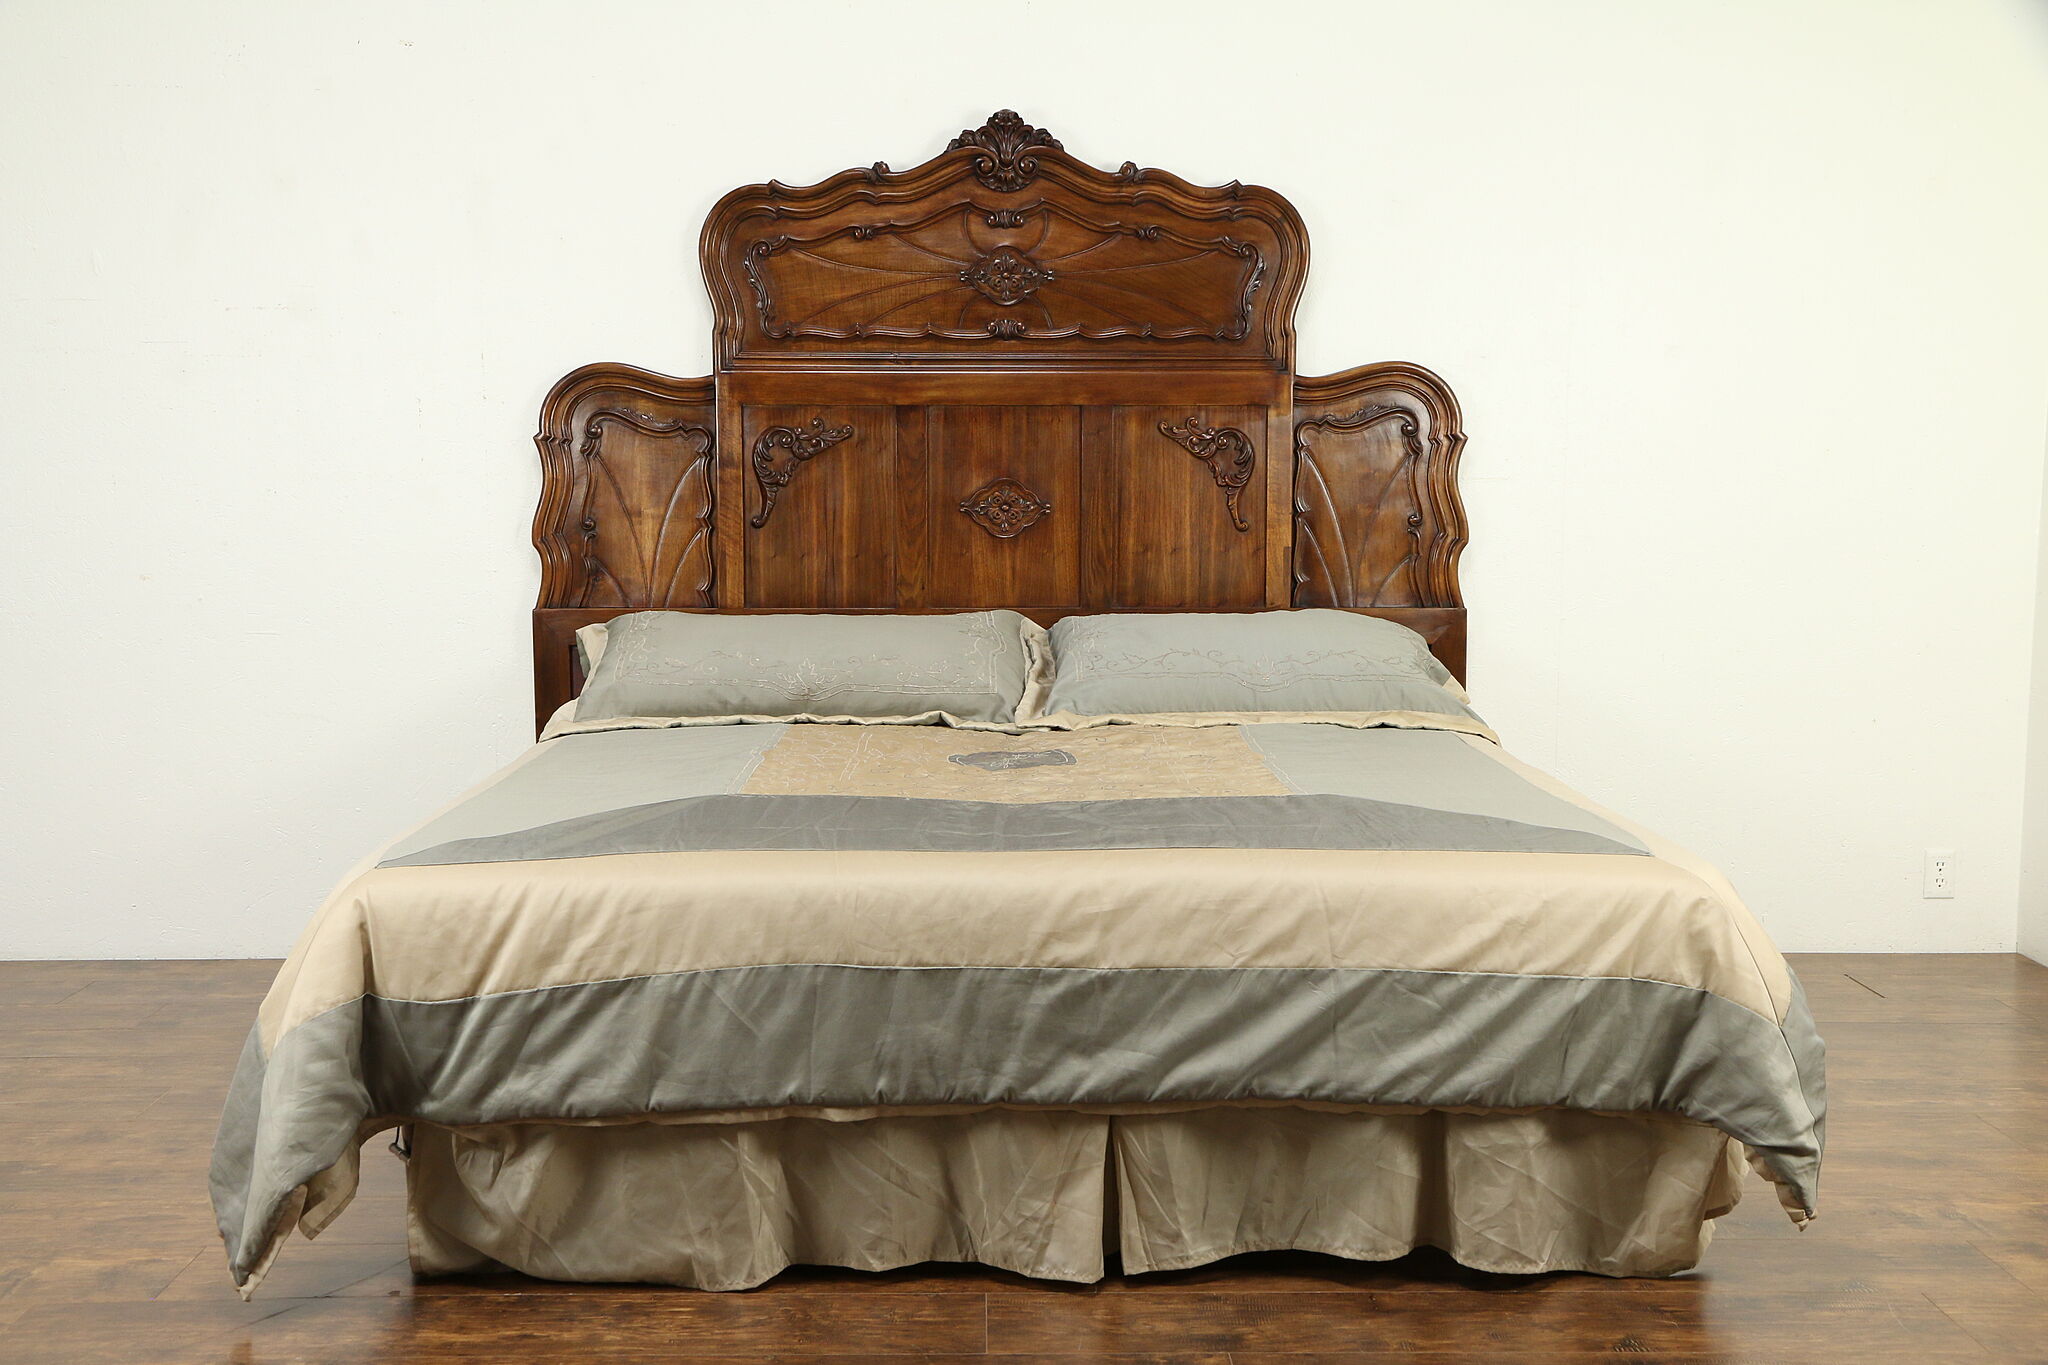 Sold Italian Antique Carved Walnut King Size Bed Headboard 31627 Harp Gallery Antiques Furniture